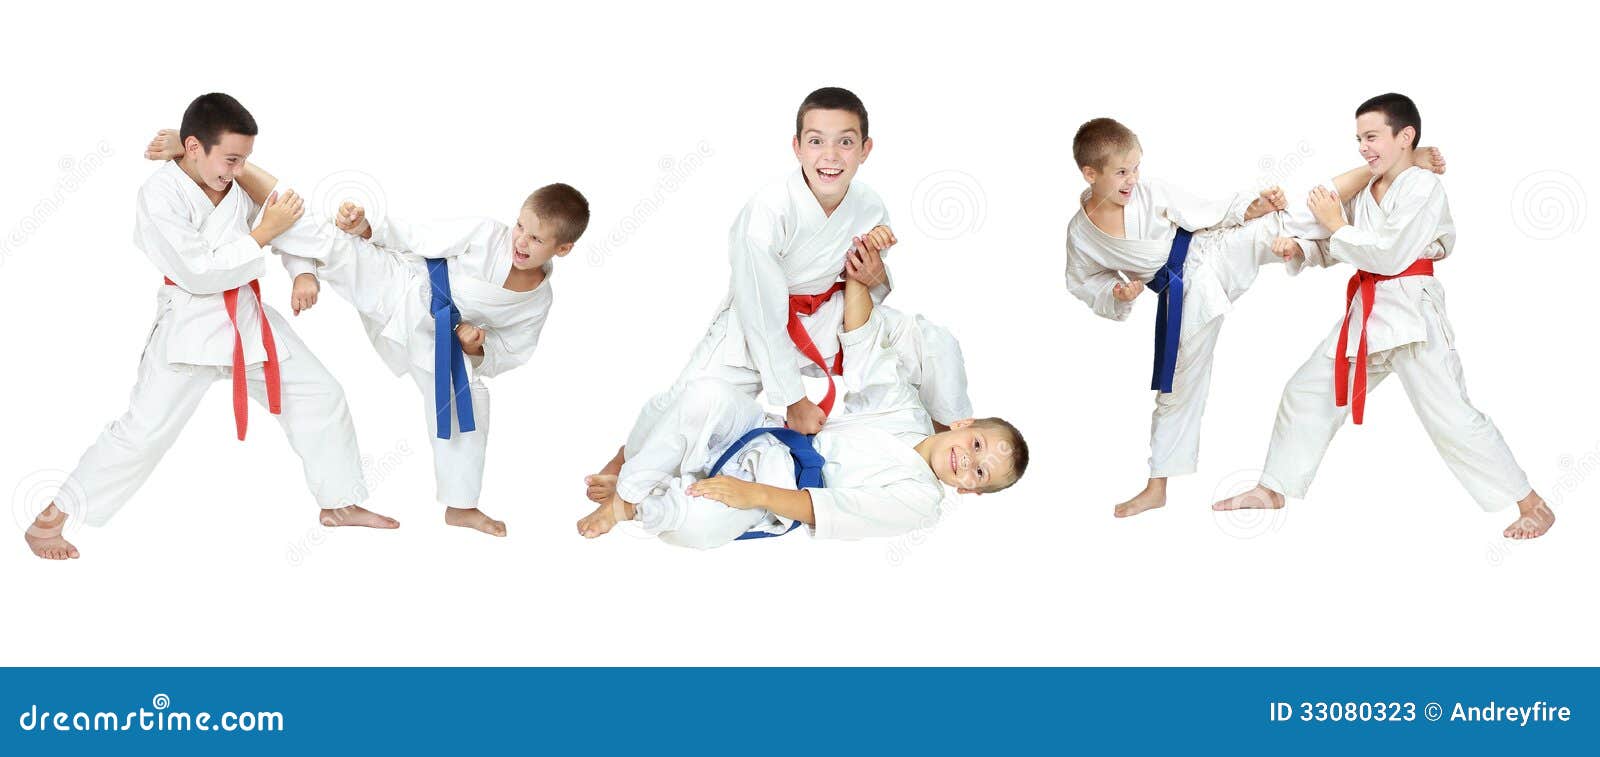 Two Boys Show Of Self Defense Techniques A Collage Stock Image Image Of Success Collage